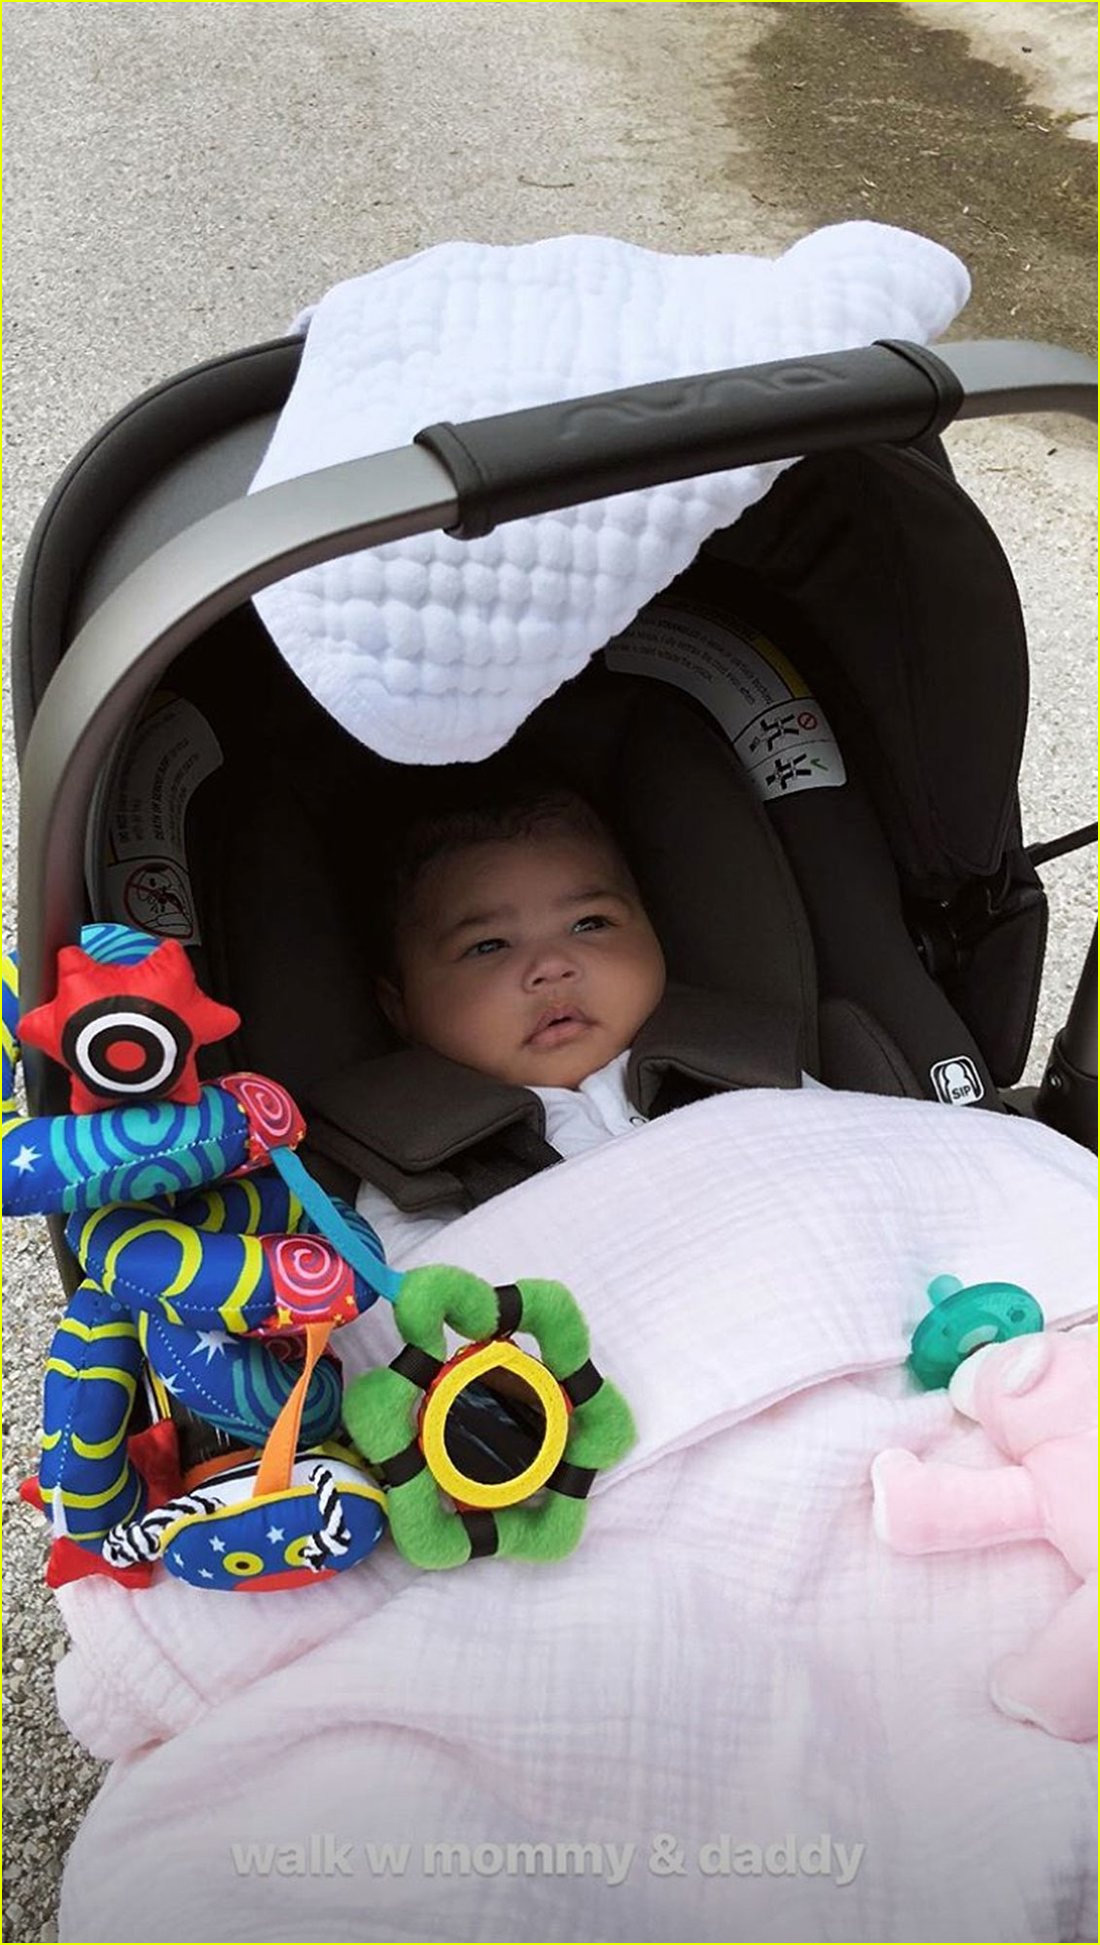 kylie jenner shares sweet photos of sleepy stormi during afternoon walk 02